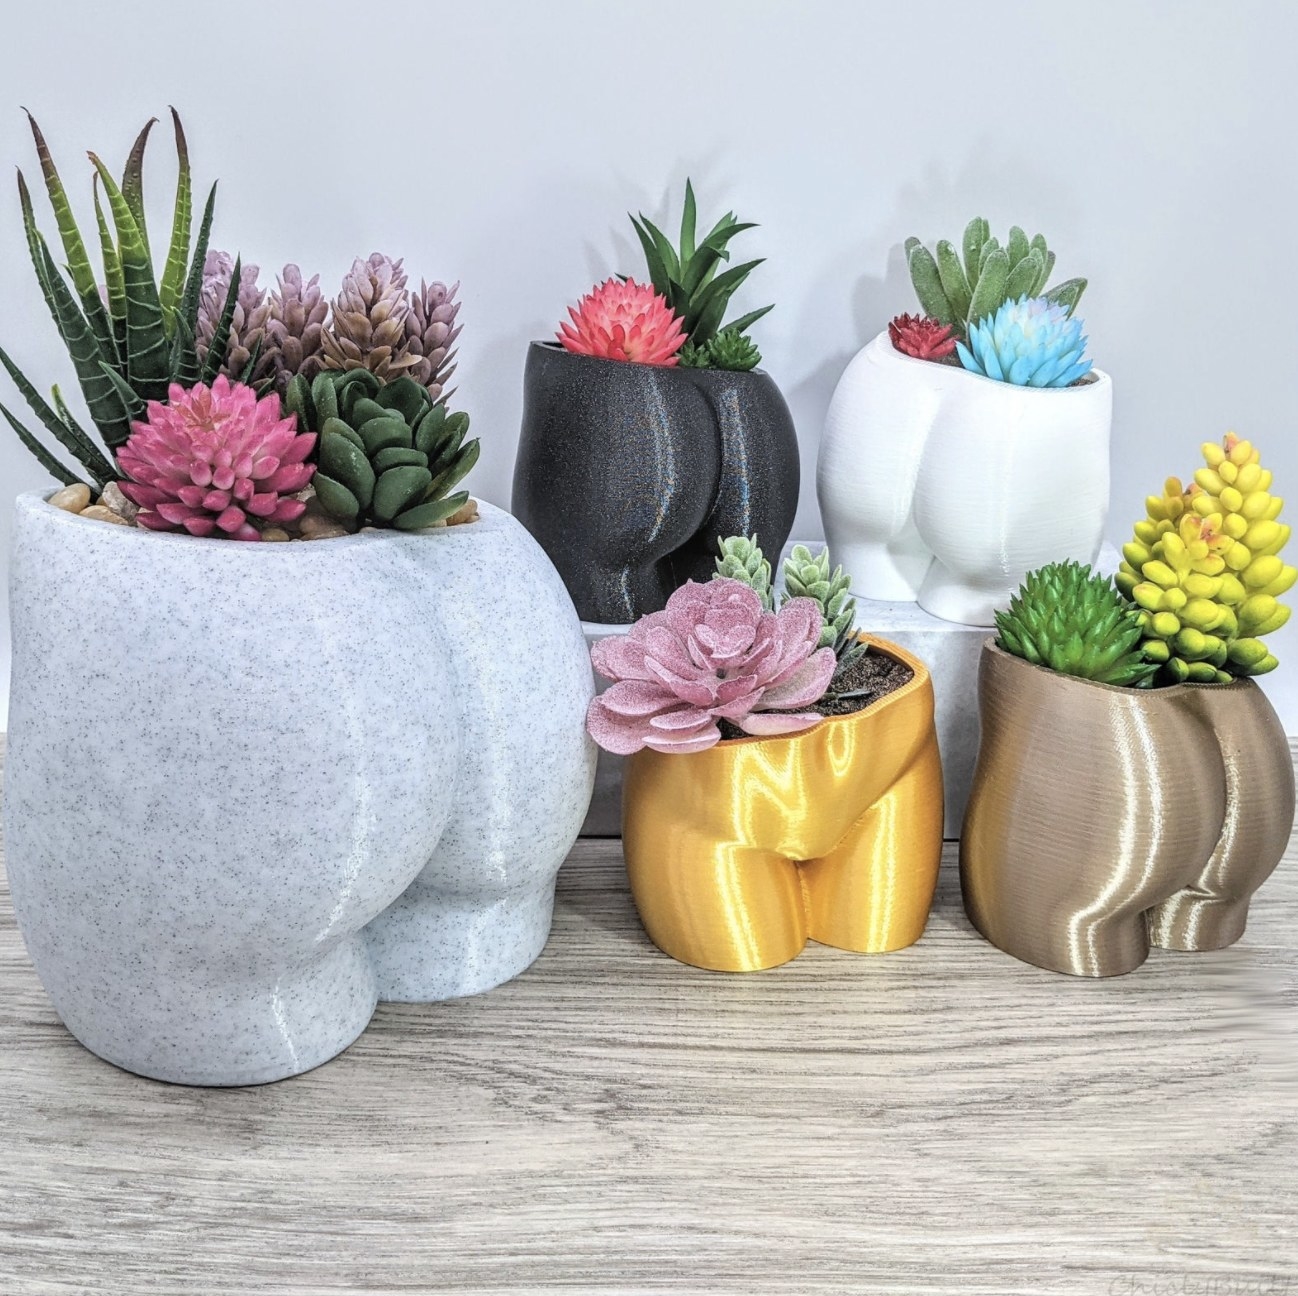 The butt planters in various colors